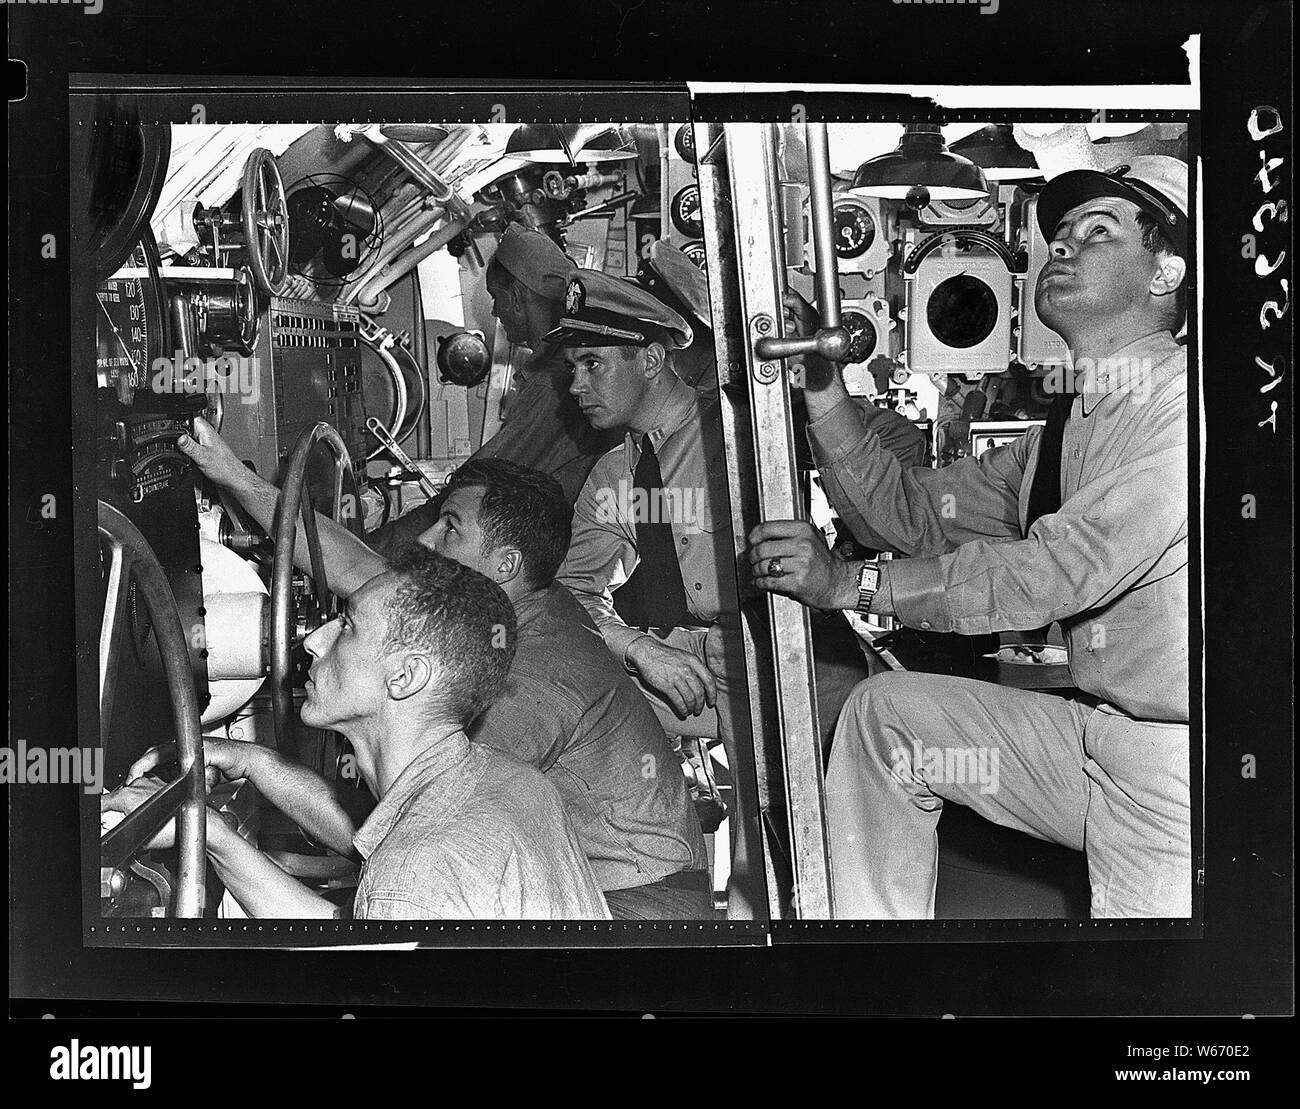 Lcdr. John R. Madison prepares to go up ladder from control room of USS Muskallunge (SS 262) at submarine base New London, Connecticut. Lt. William B. Robb is at his station. Stock Photo